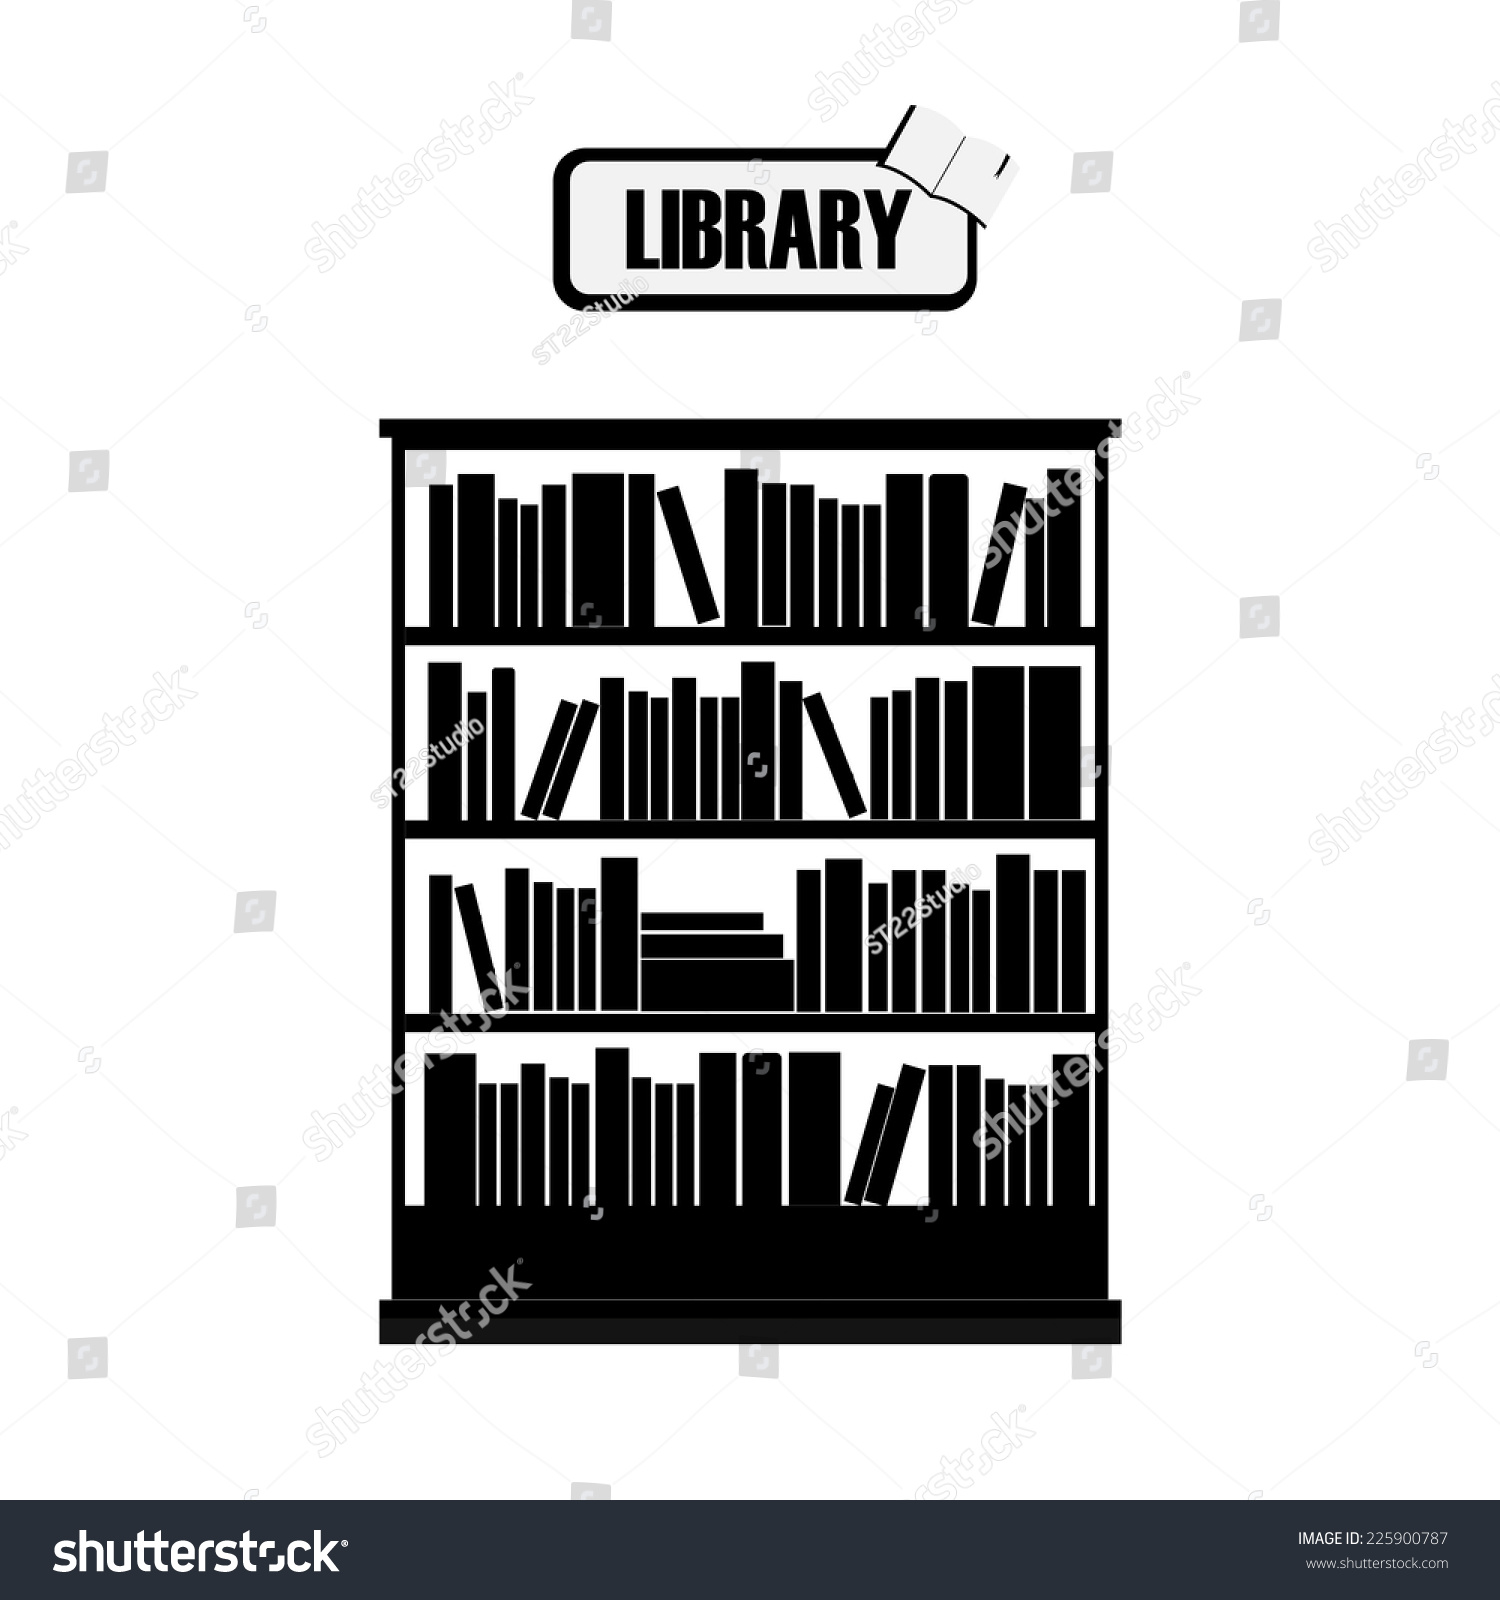 clipart library black and white - photo #29